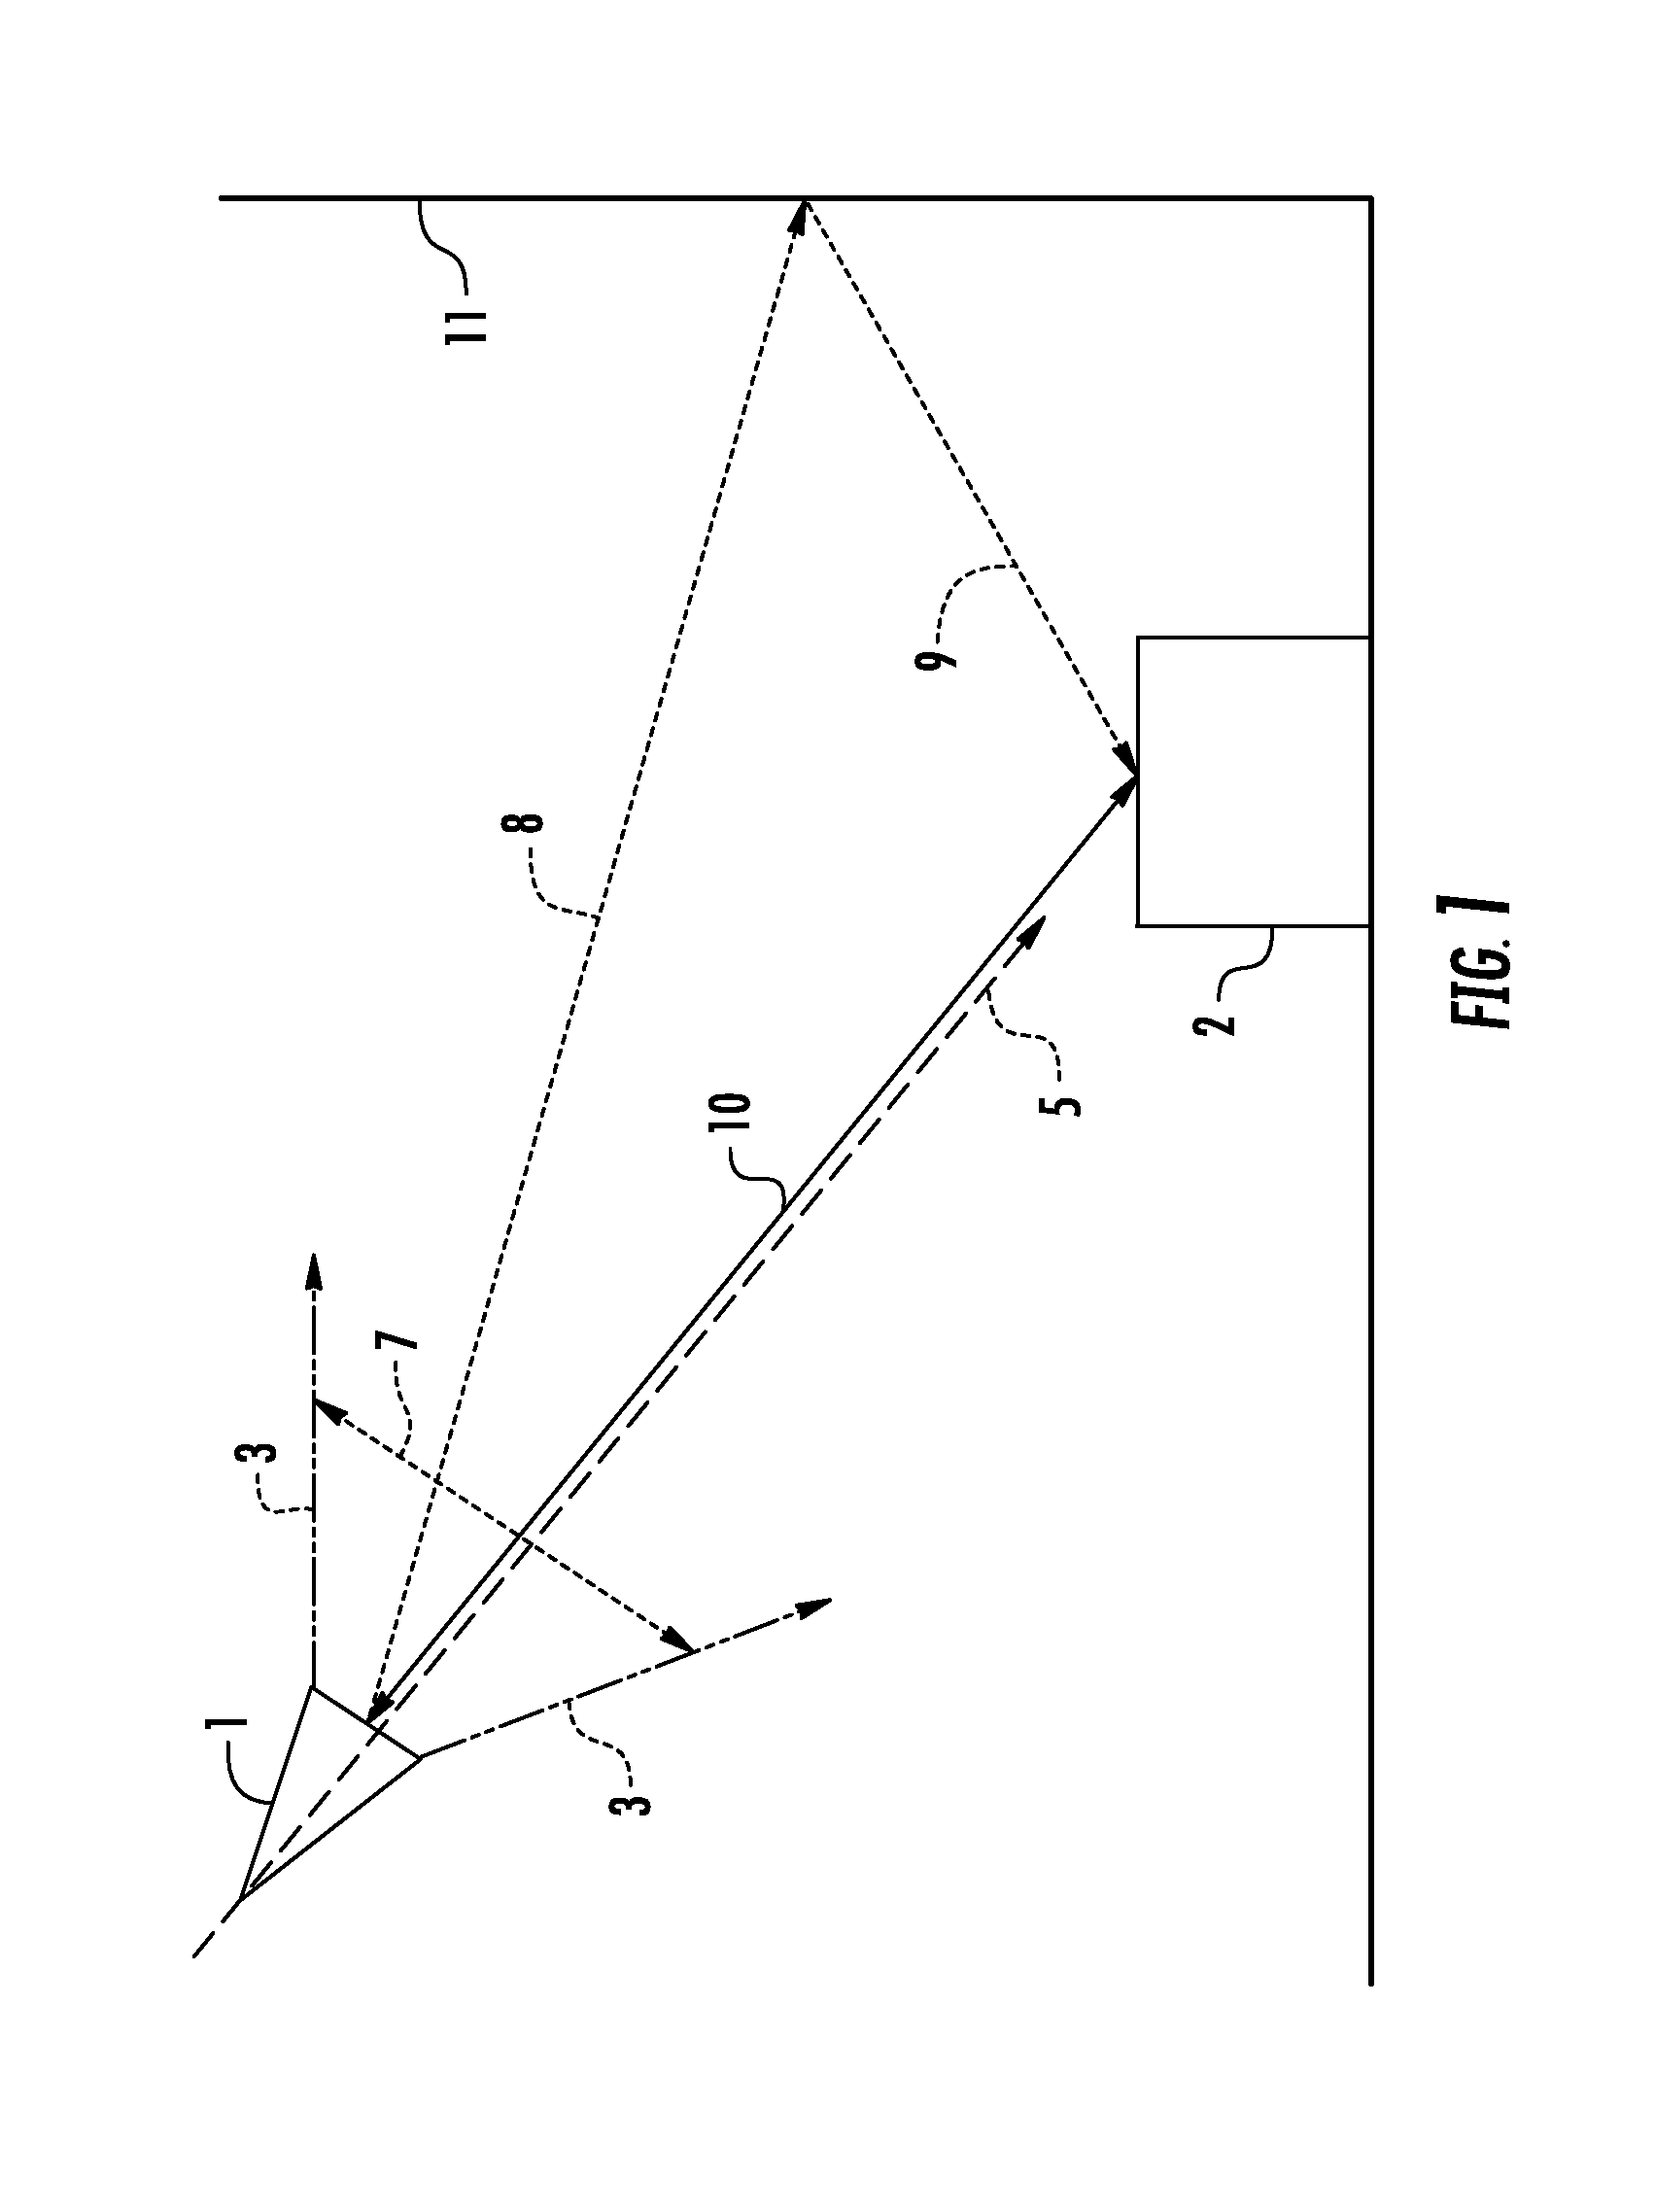 Dimensioning system with multipath interference mitigation